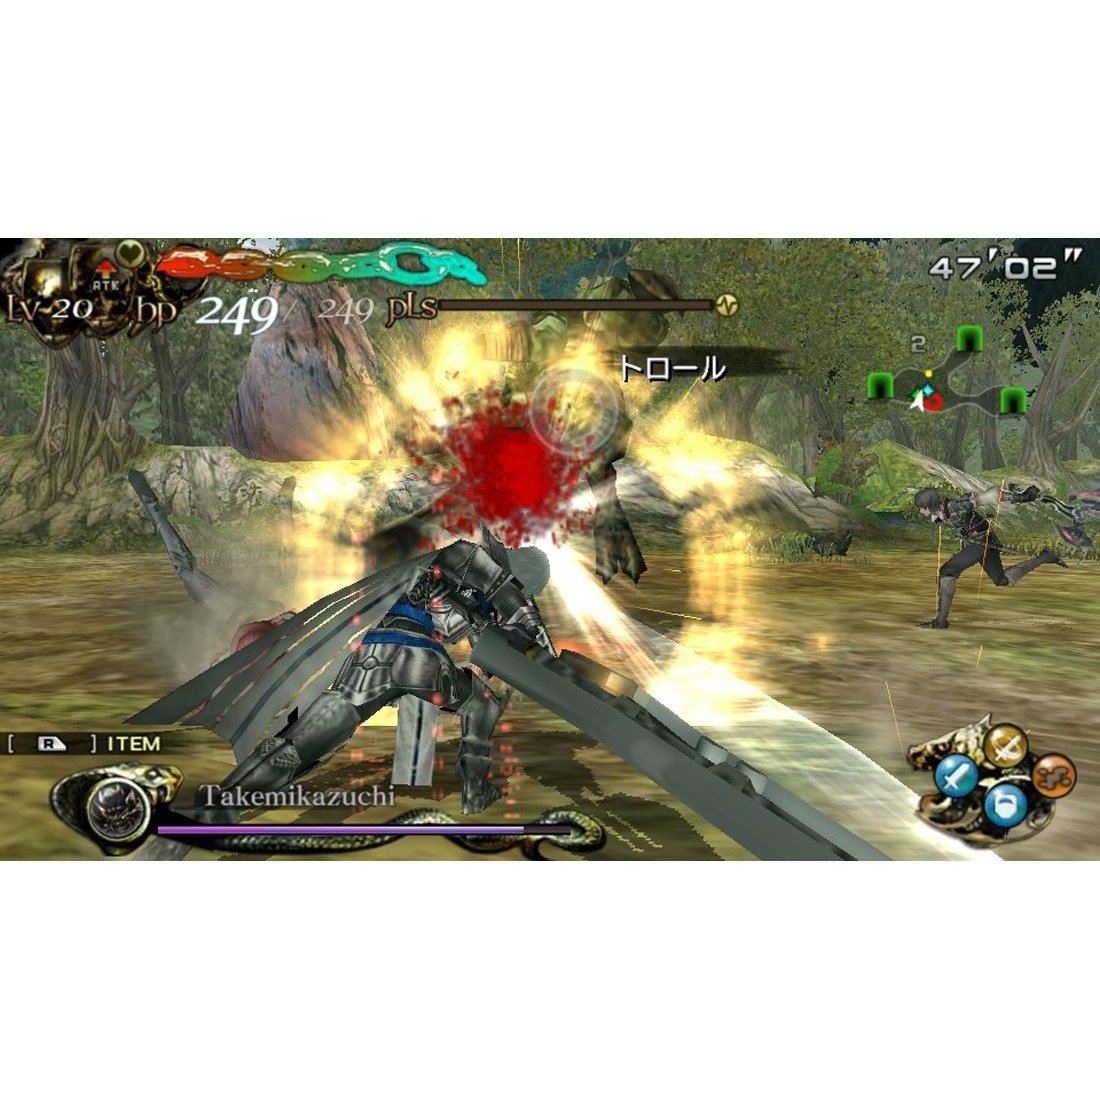 Lord of Apocalypse for PlayStation Vita